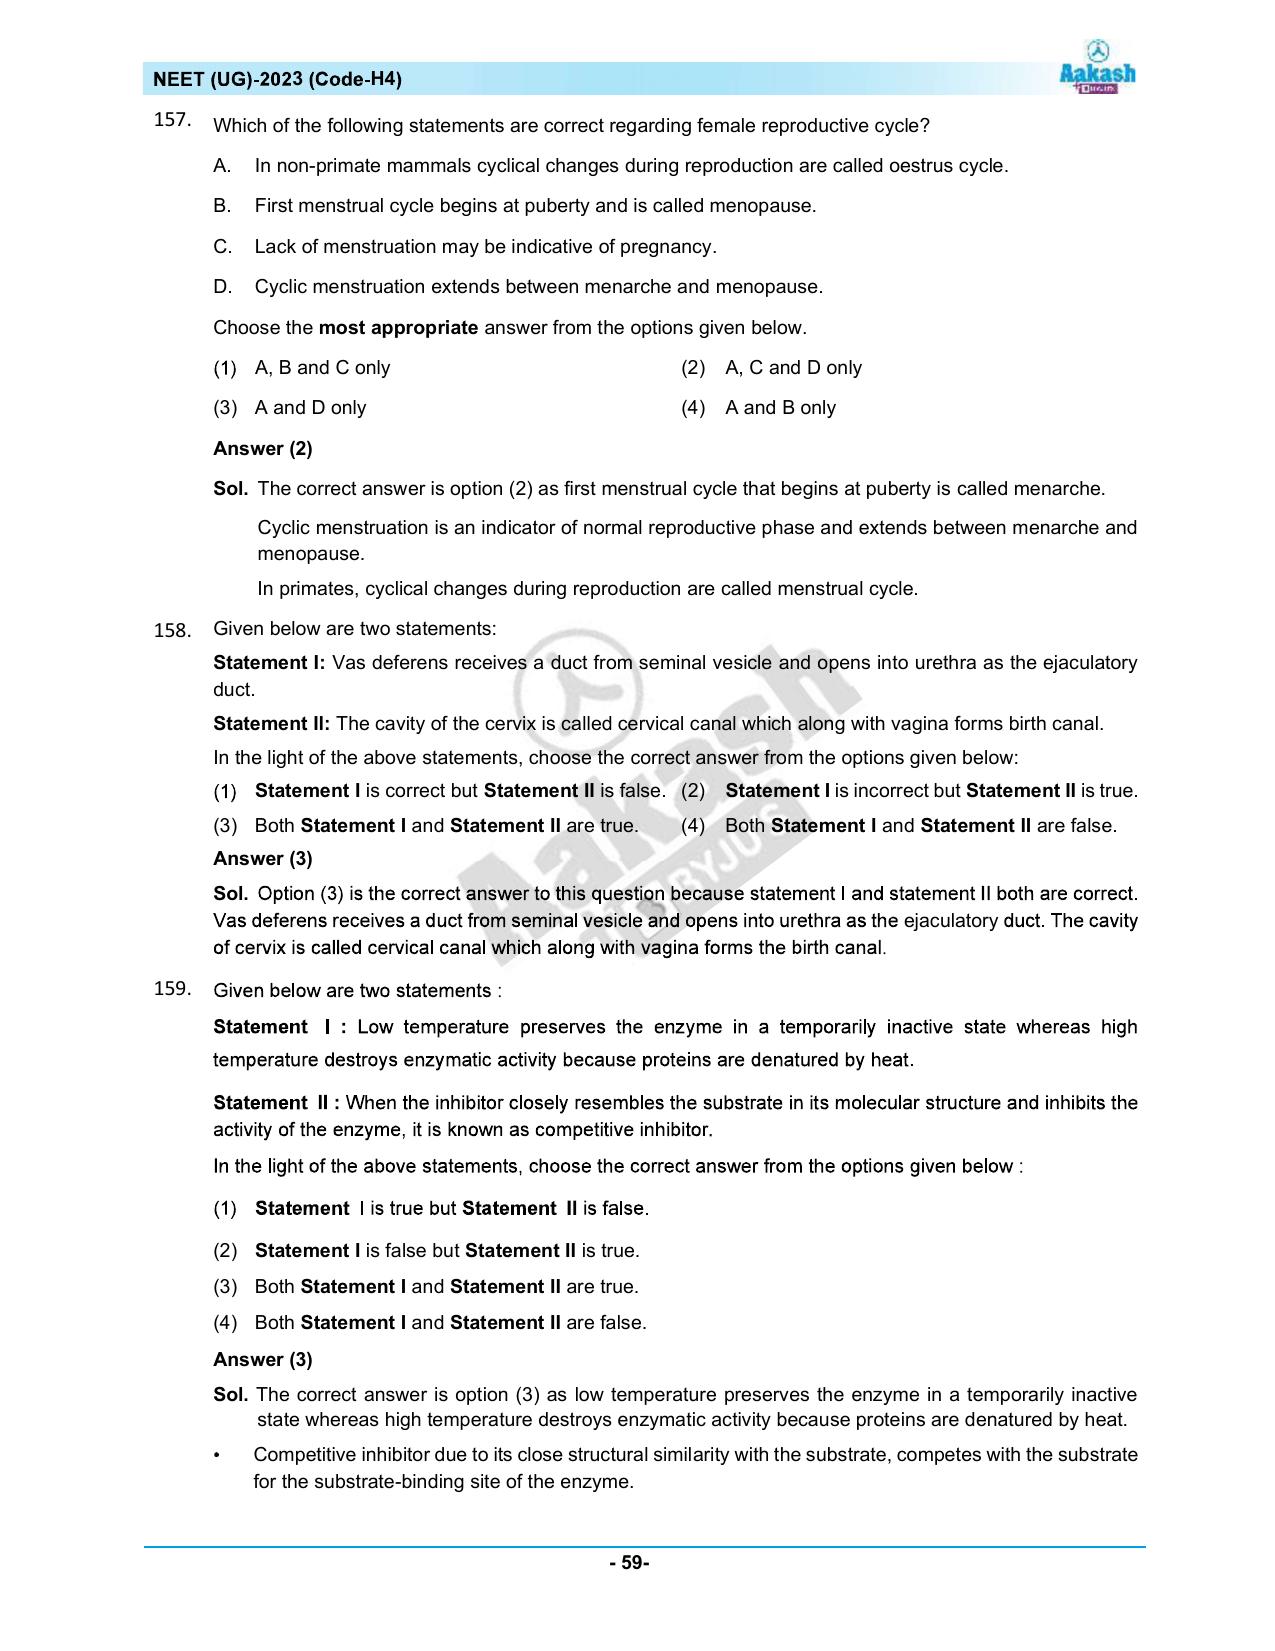 NEET 2023 Question Paper H4 - Page 59